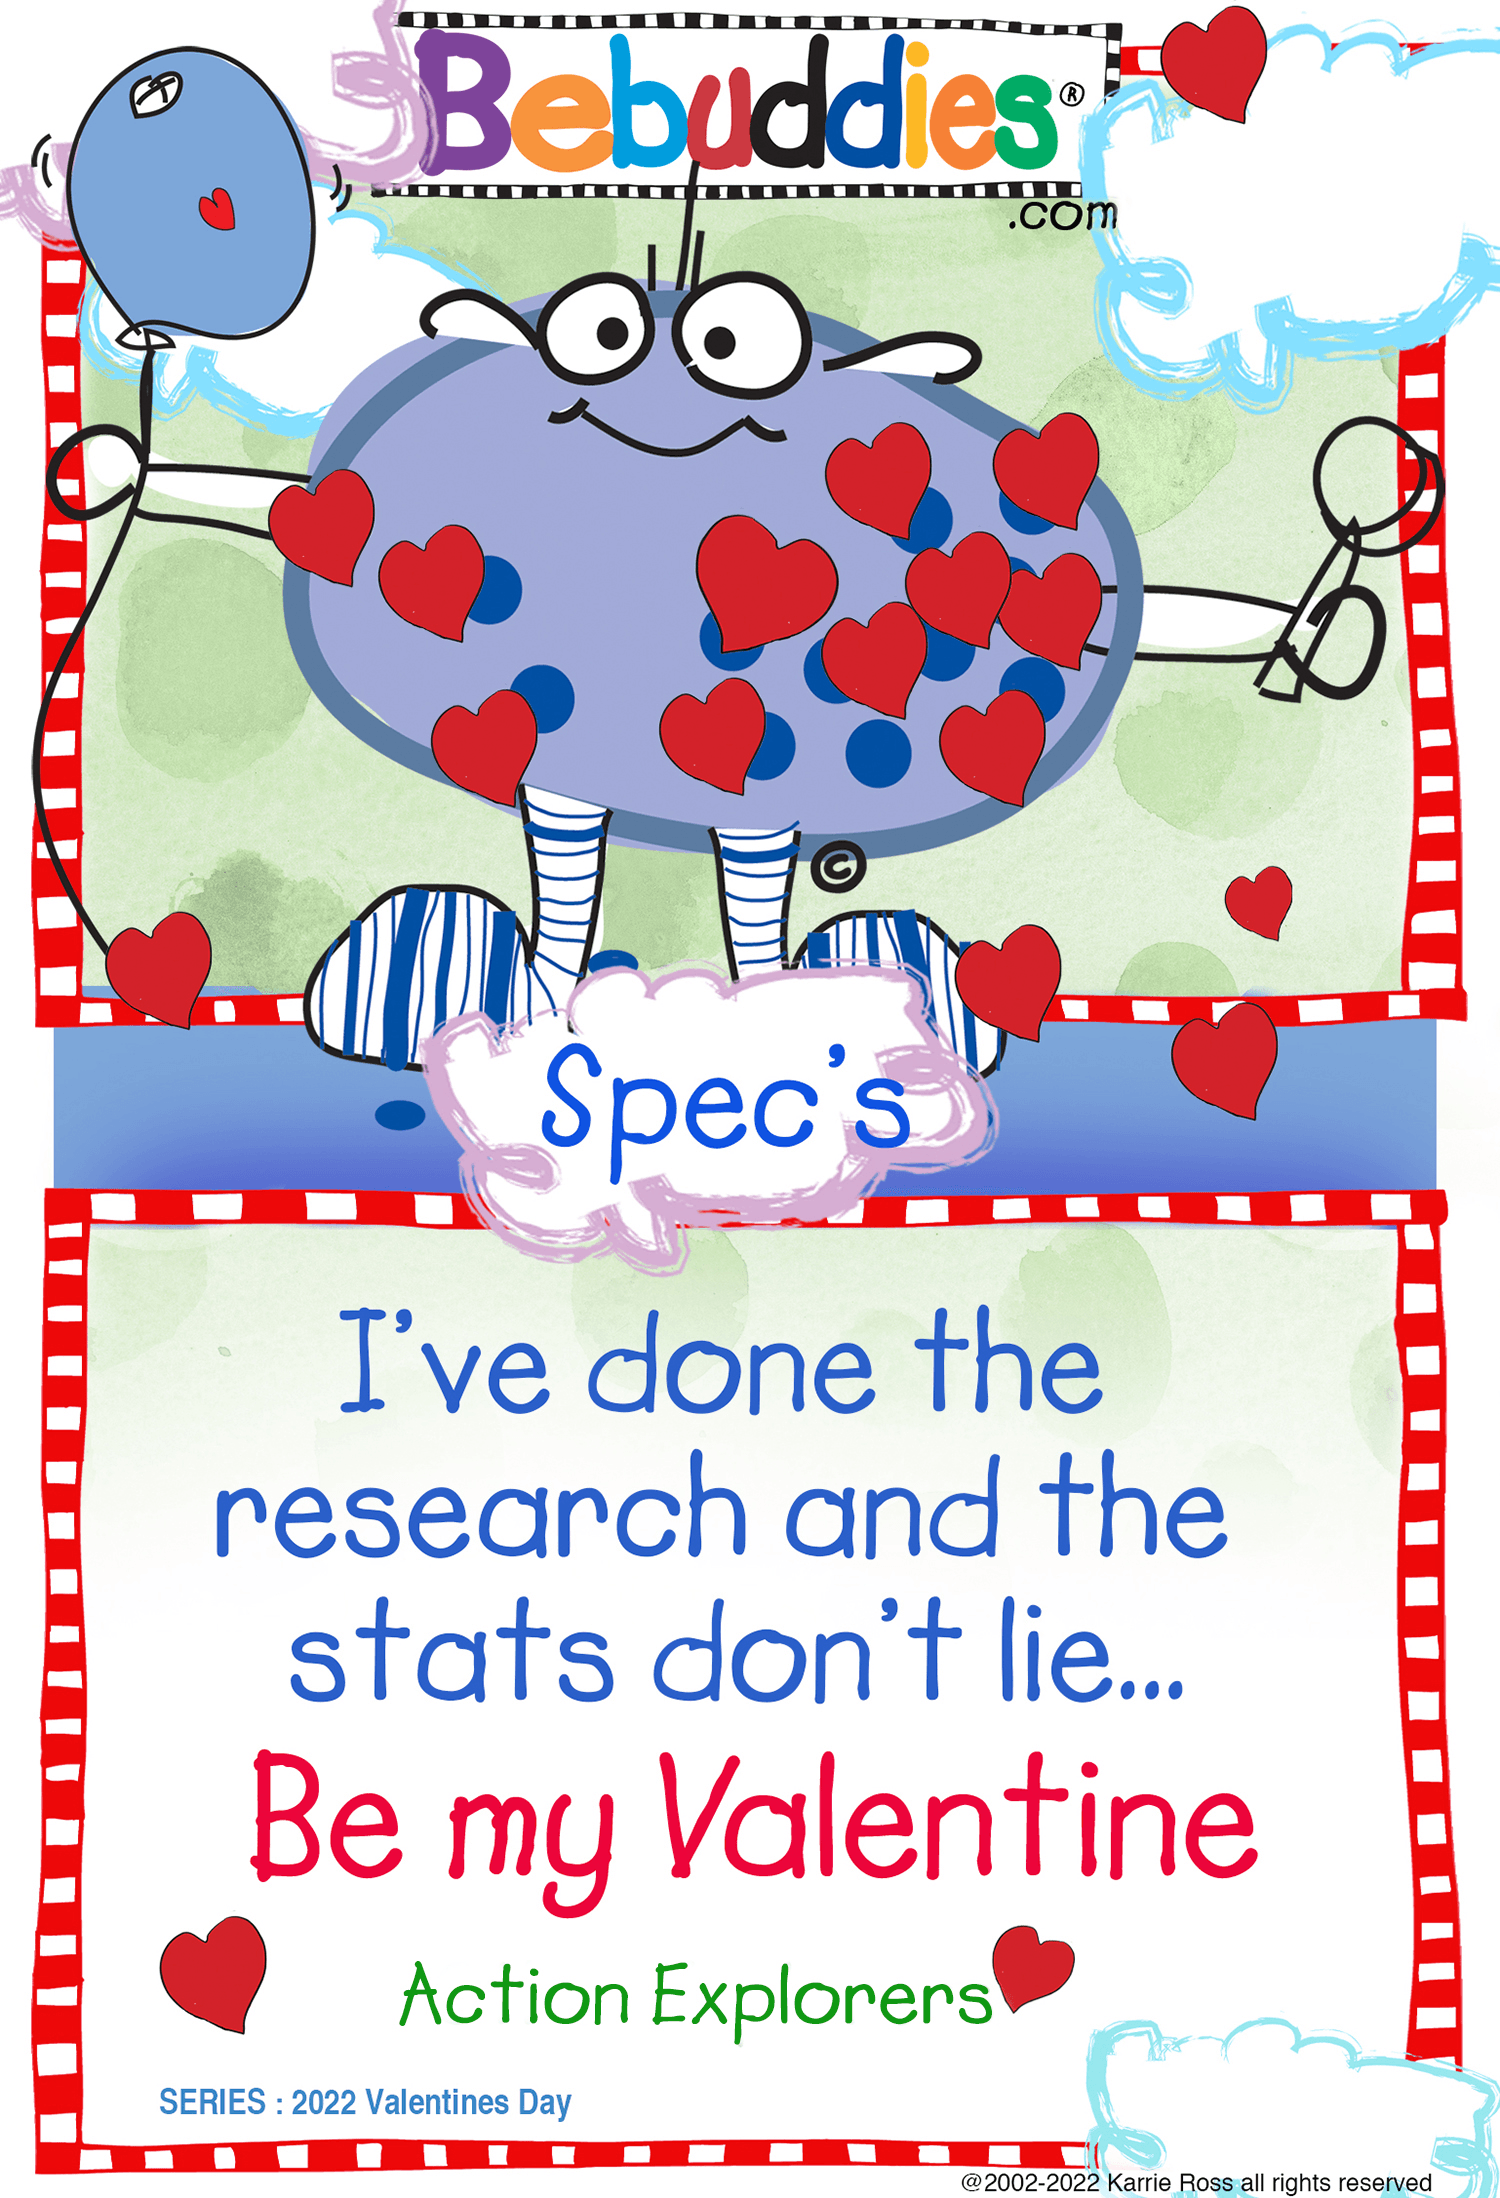 Bebuddies Holidays: Valentines Day by Karrie Ross : Specs